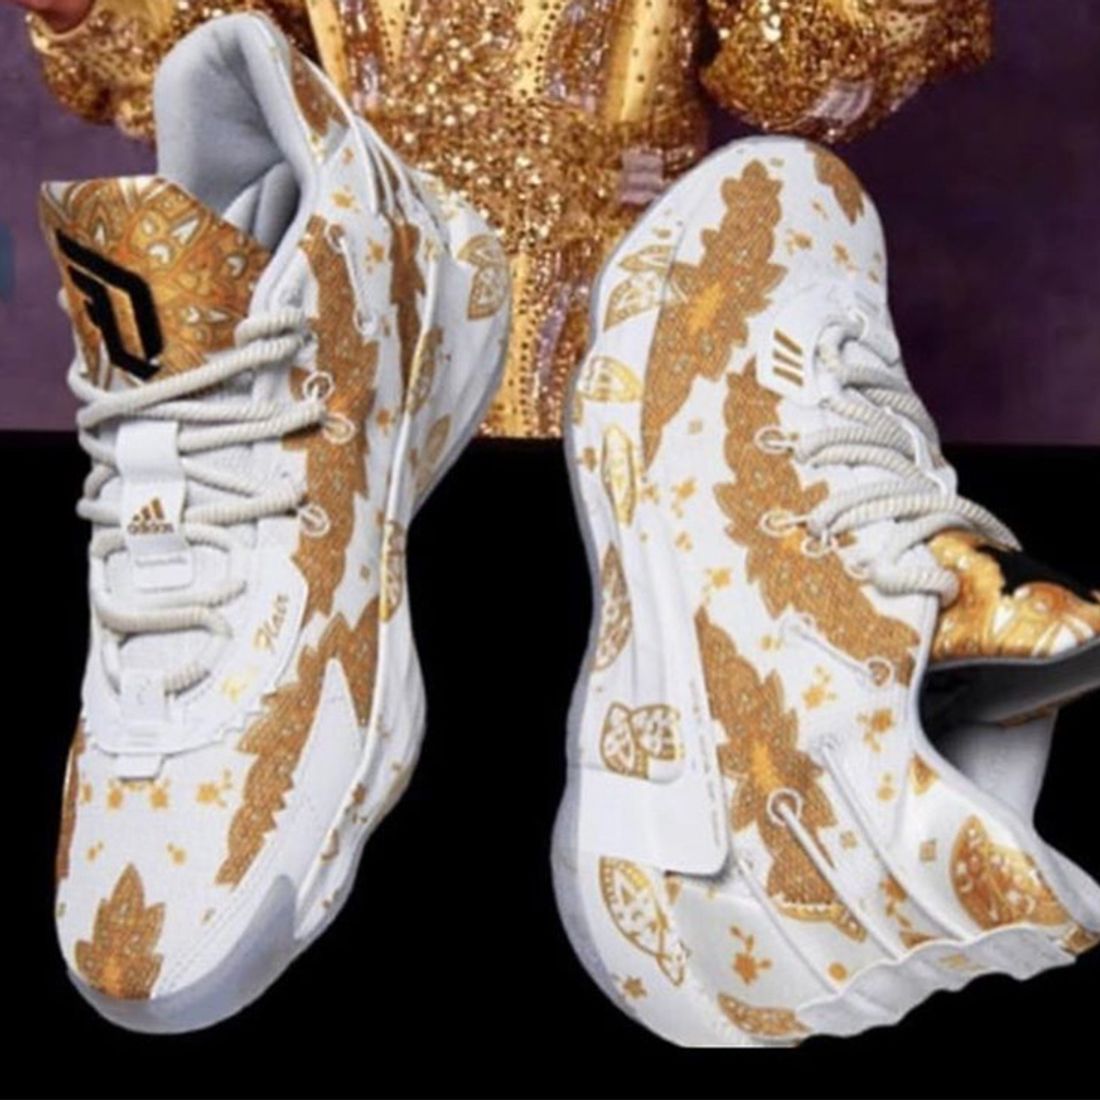 Ric Flair x adidas Dame 7 King of Drip Release Date